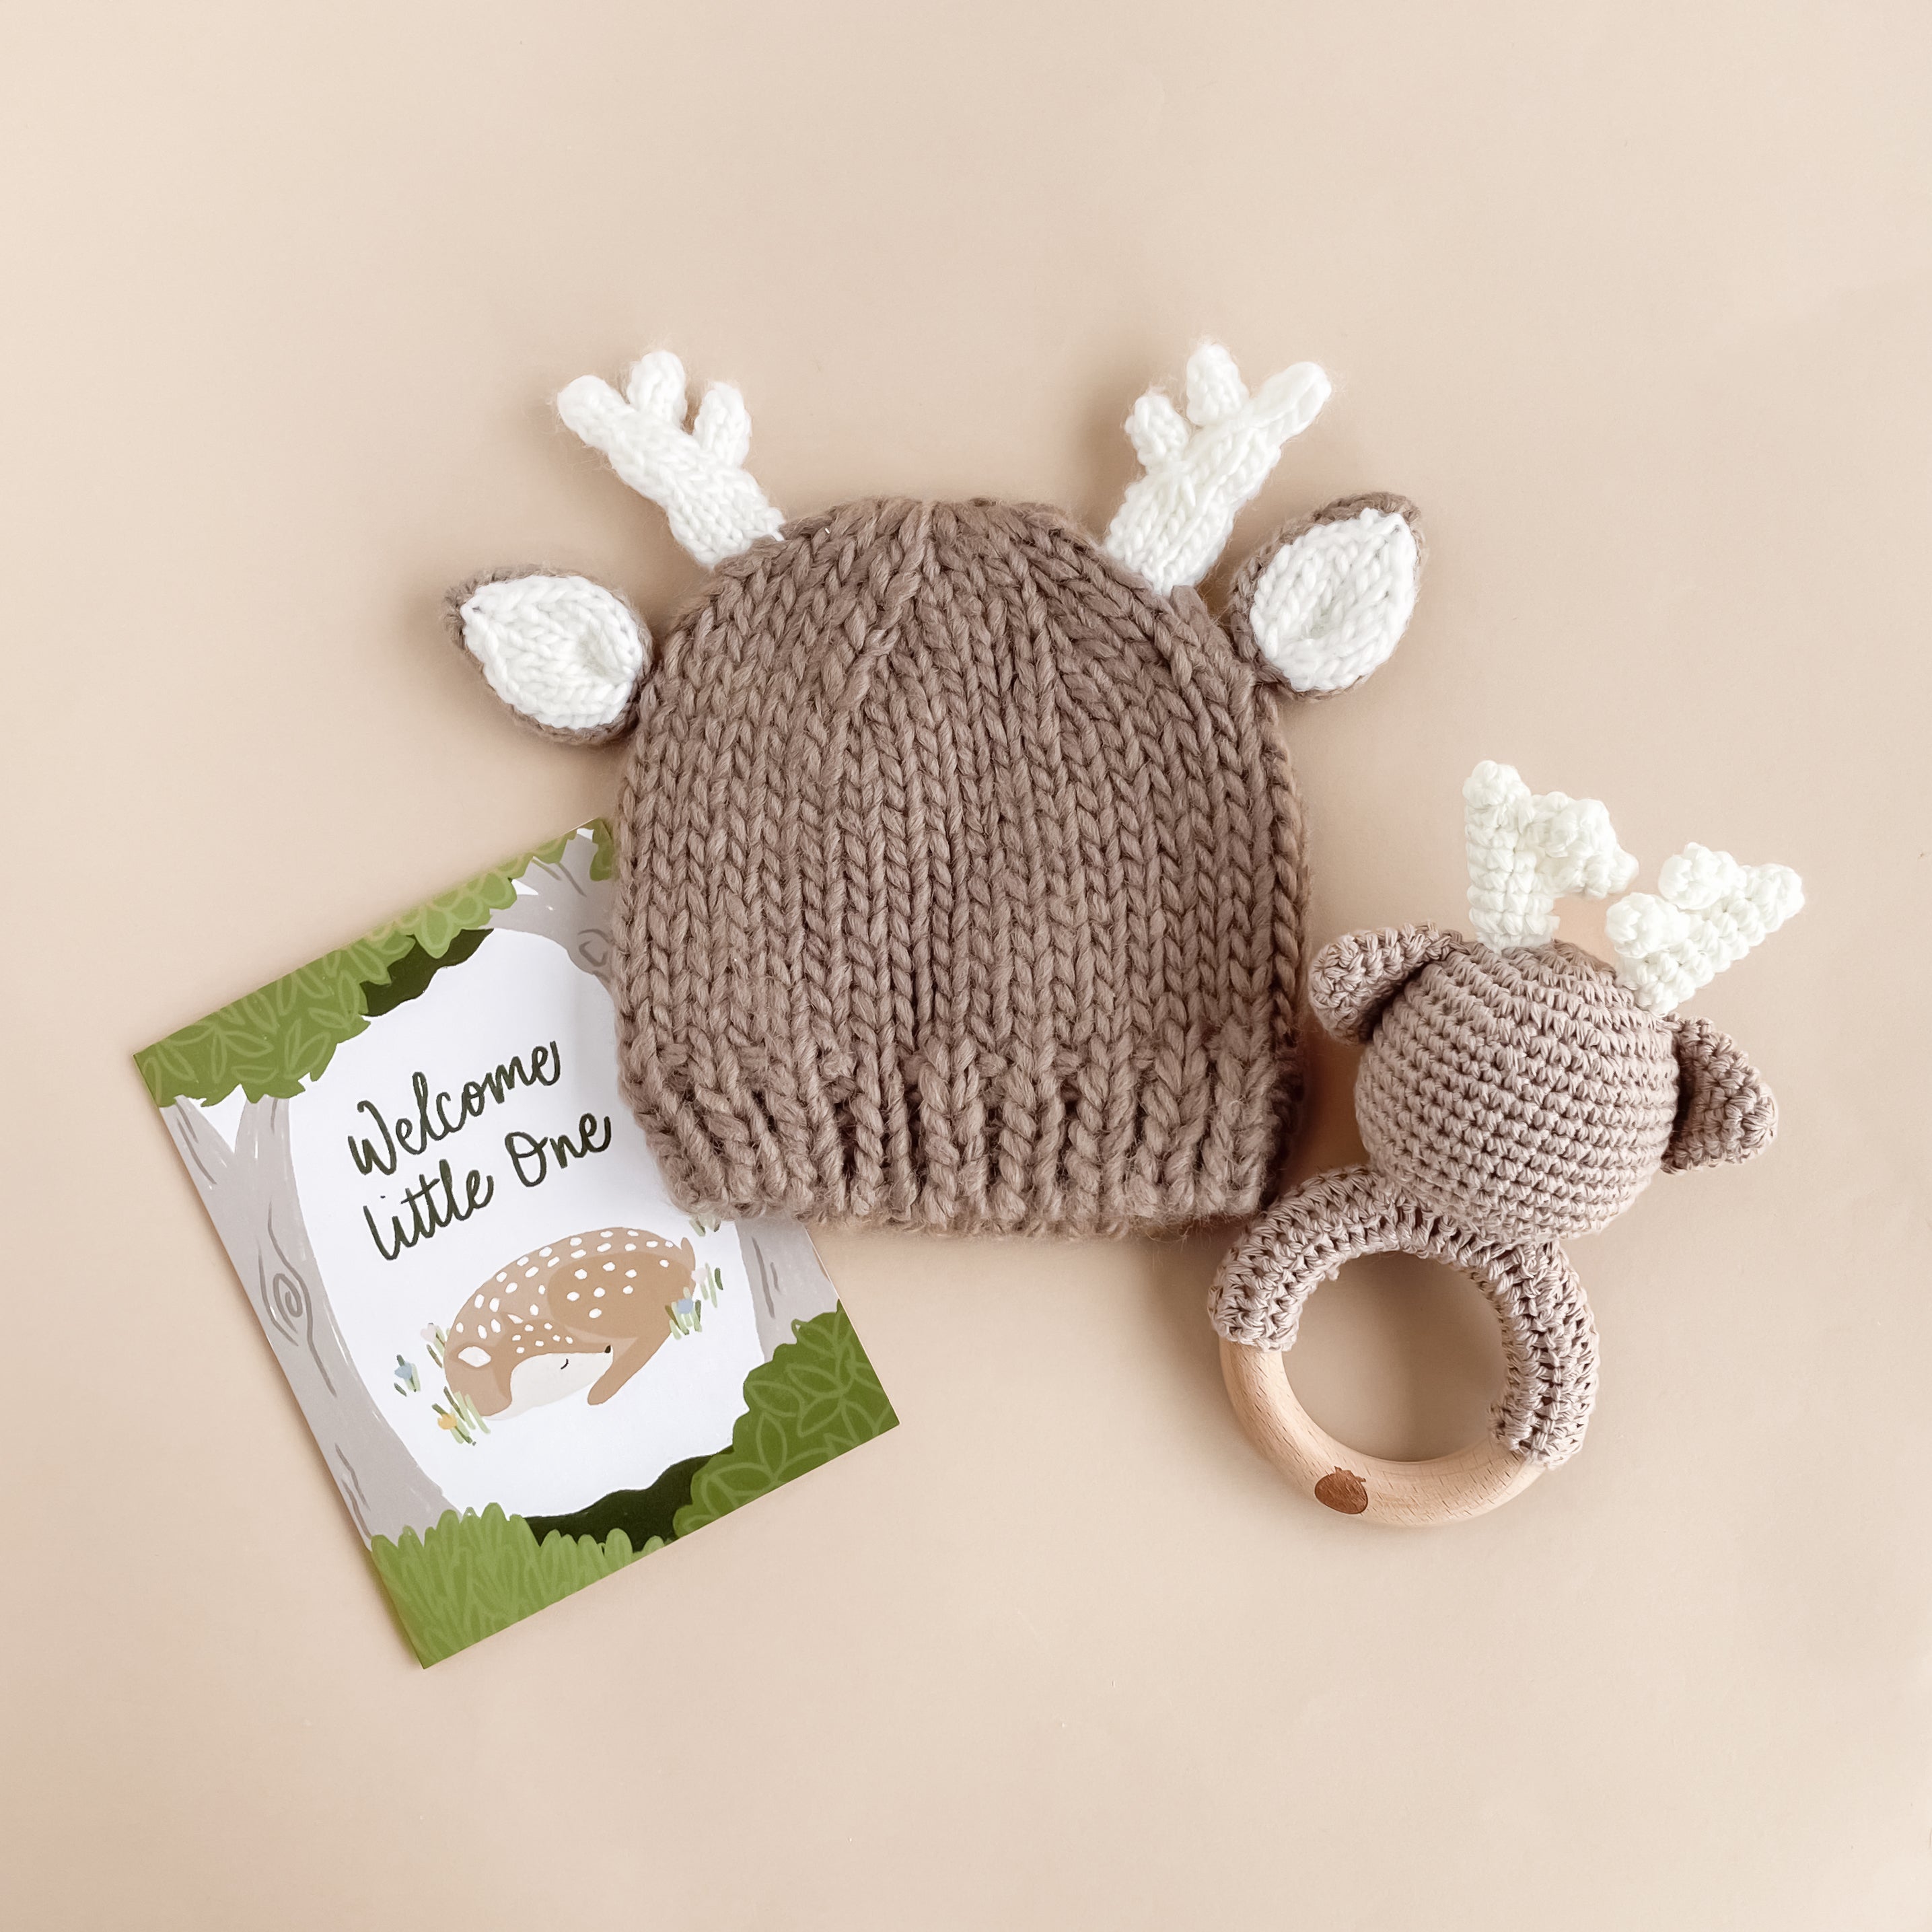 Hartley Deer Gray Knit Hat – The Blueberry Hill